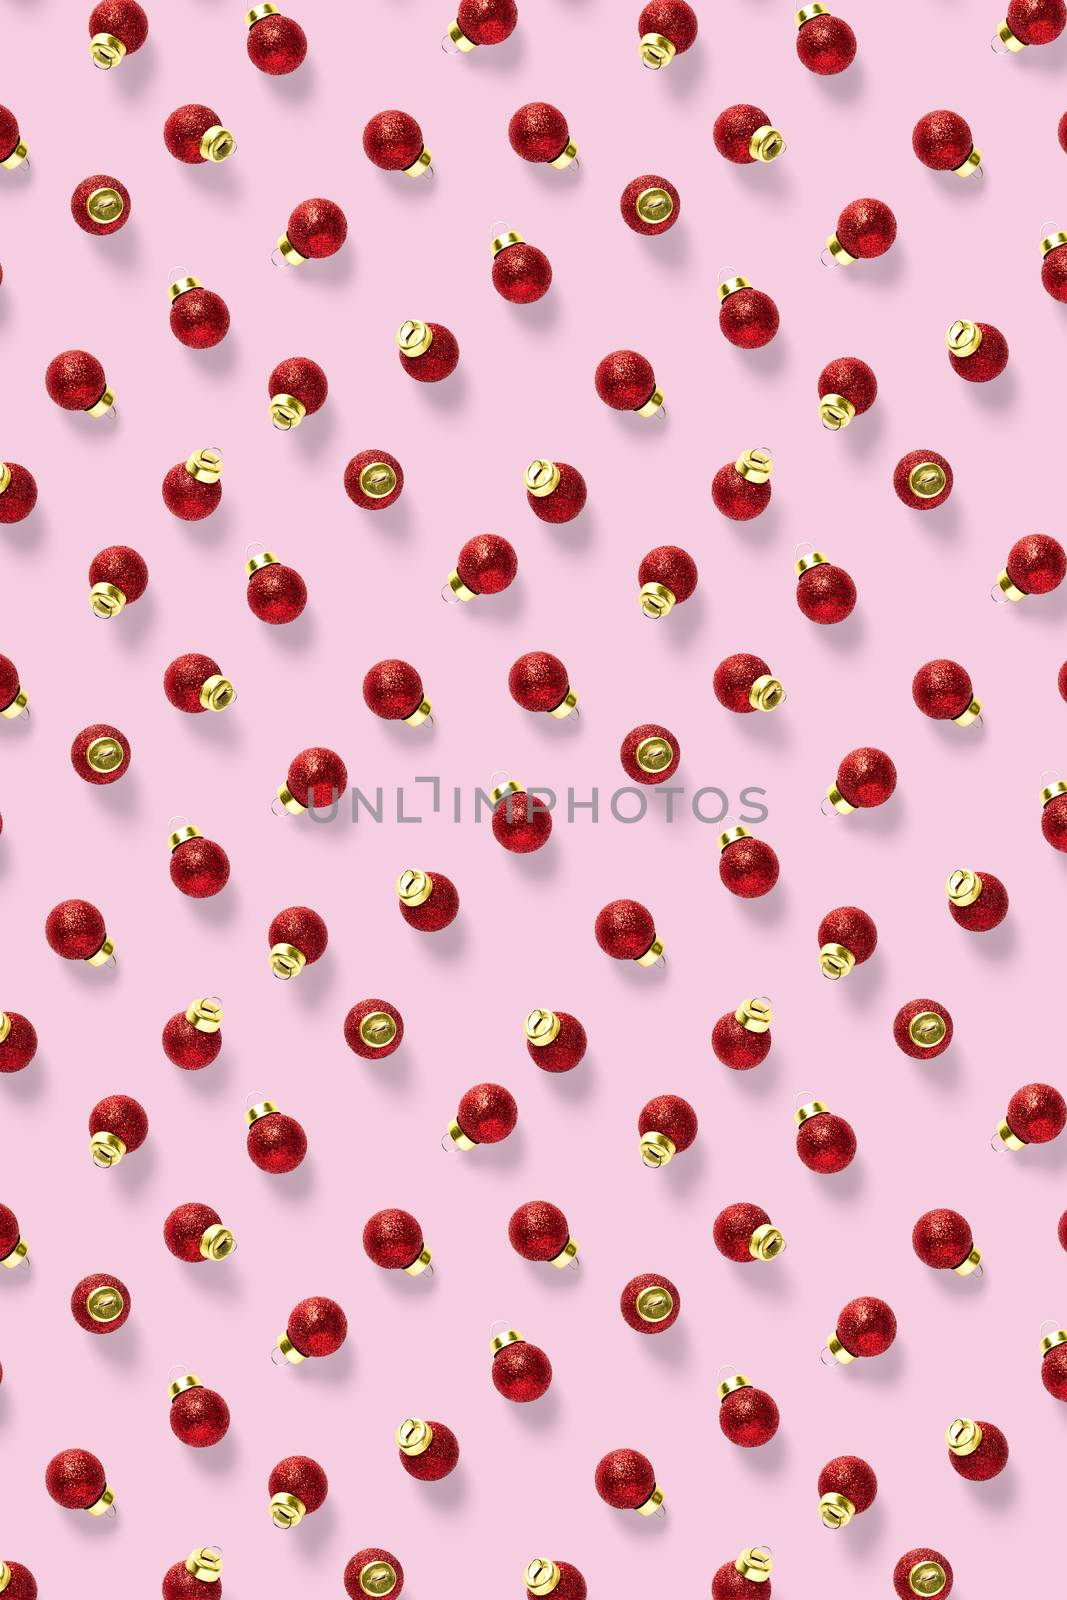 Christmas red decorations on pink background. Christmas ornaments composition for background. Flat lay background madefrome red ornaments decorations